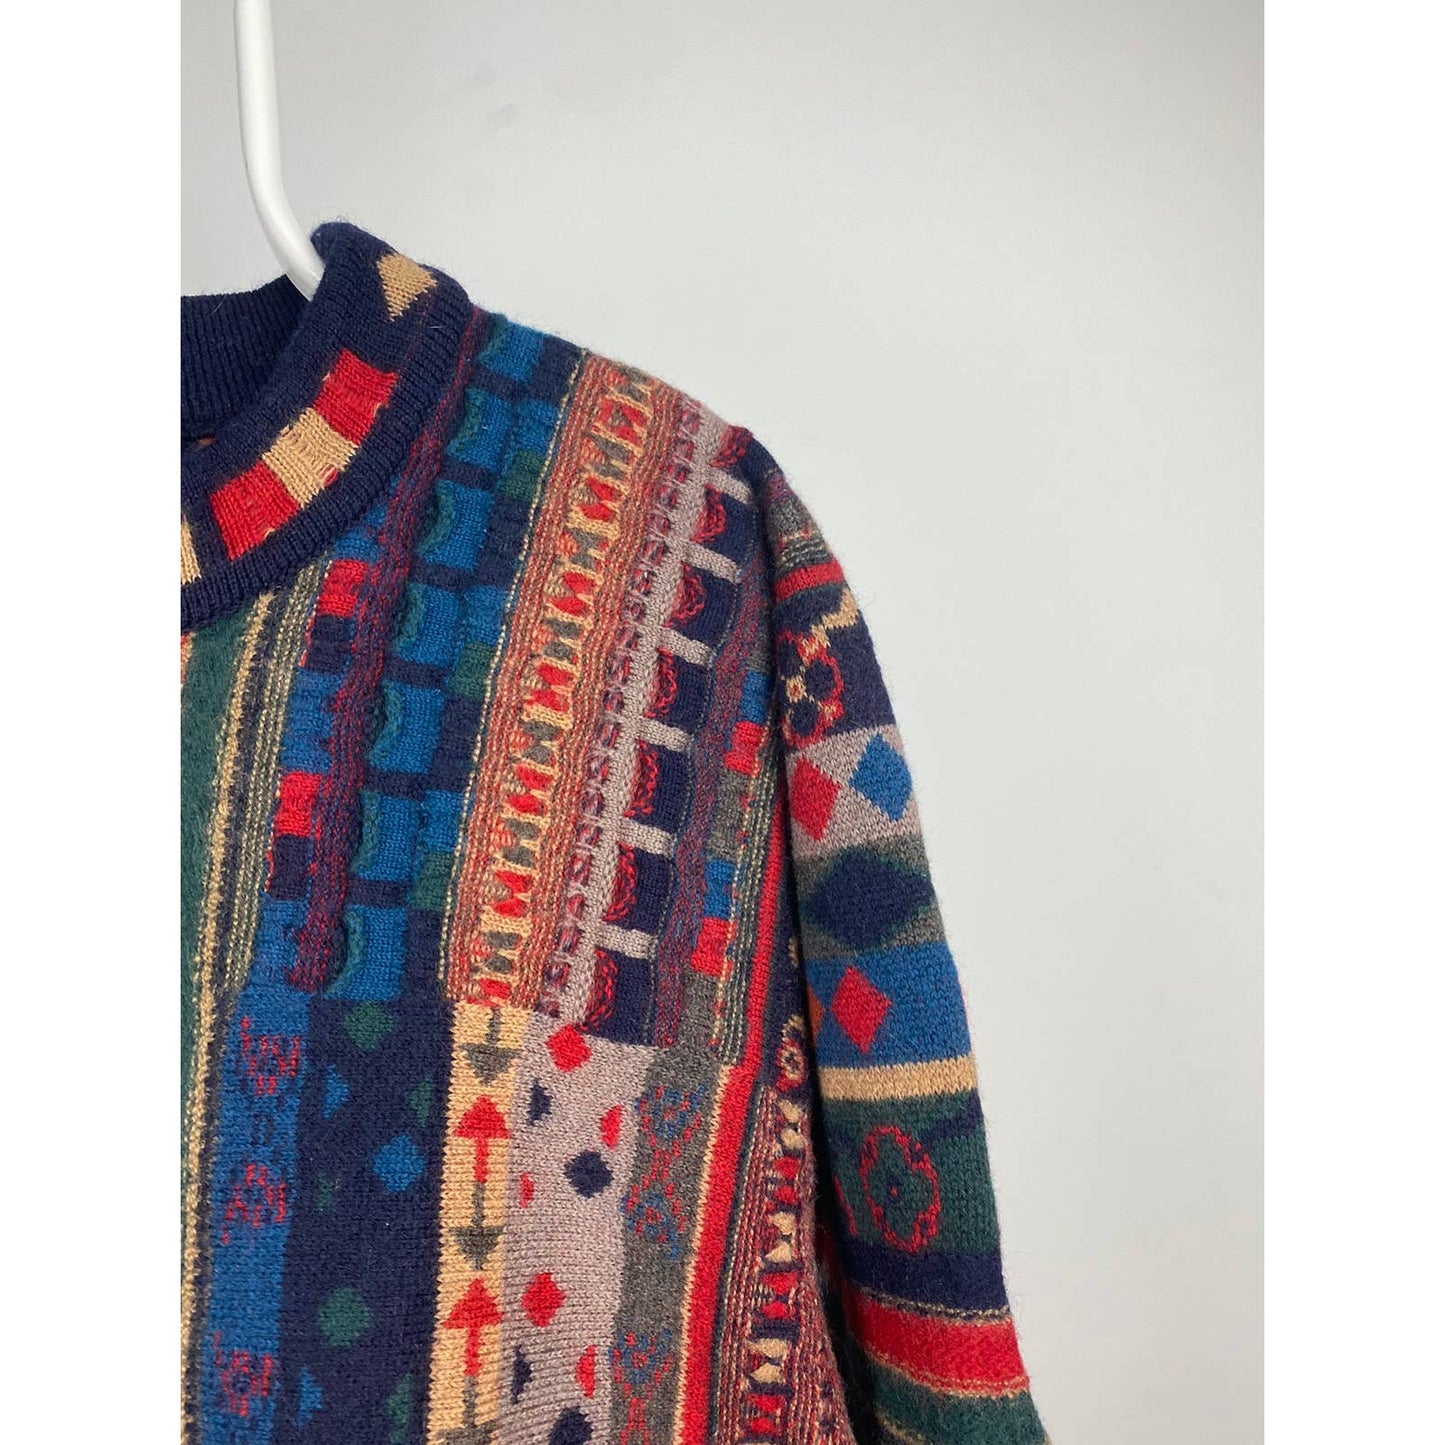 Coogi sweater vintage red green multicolor knit Australia